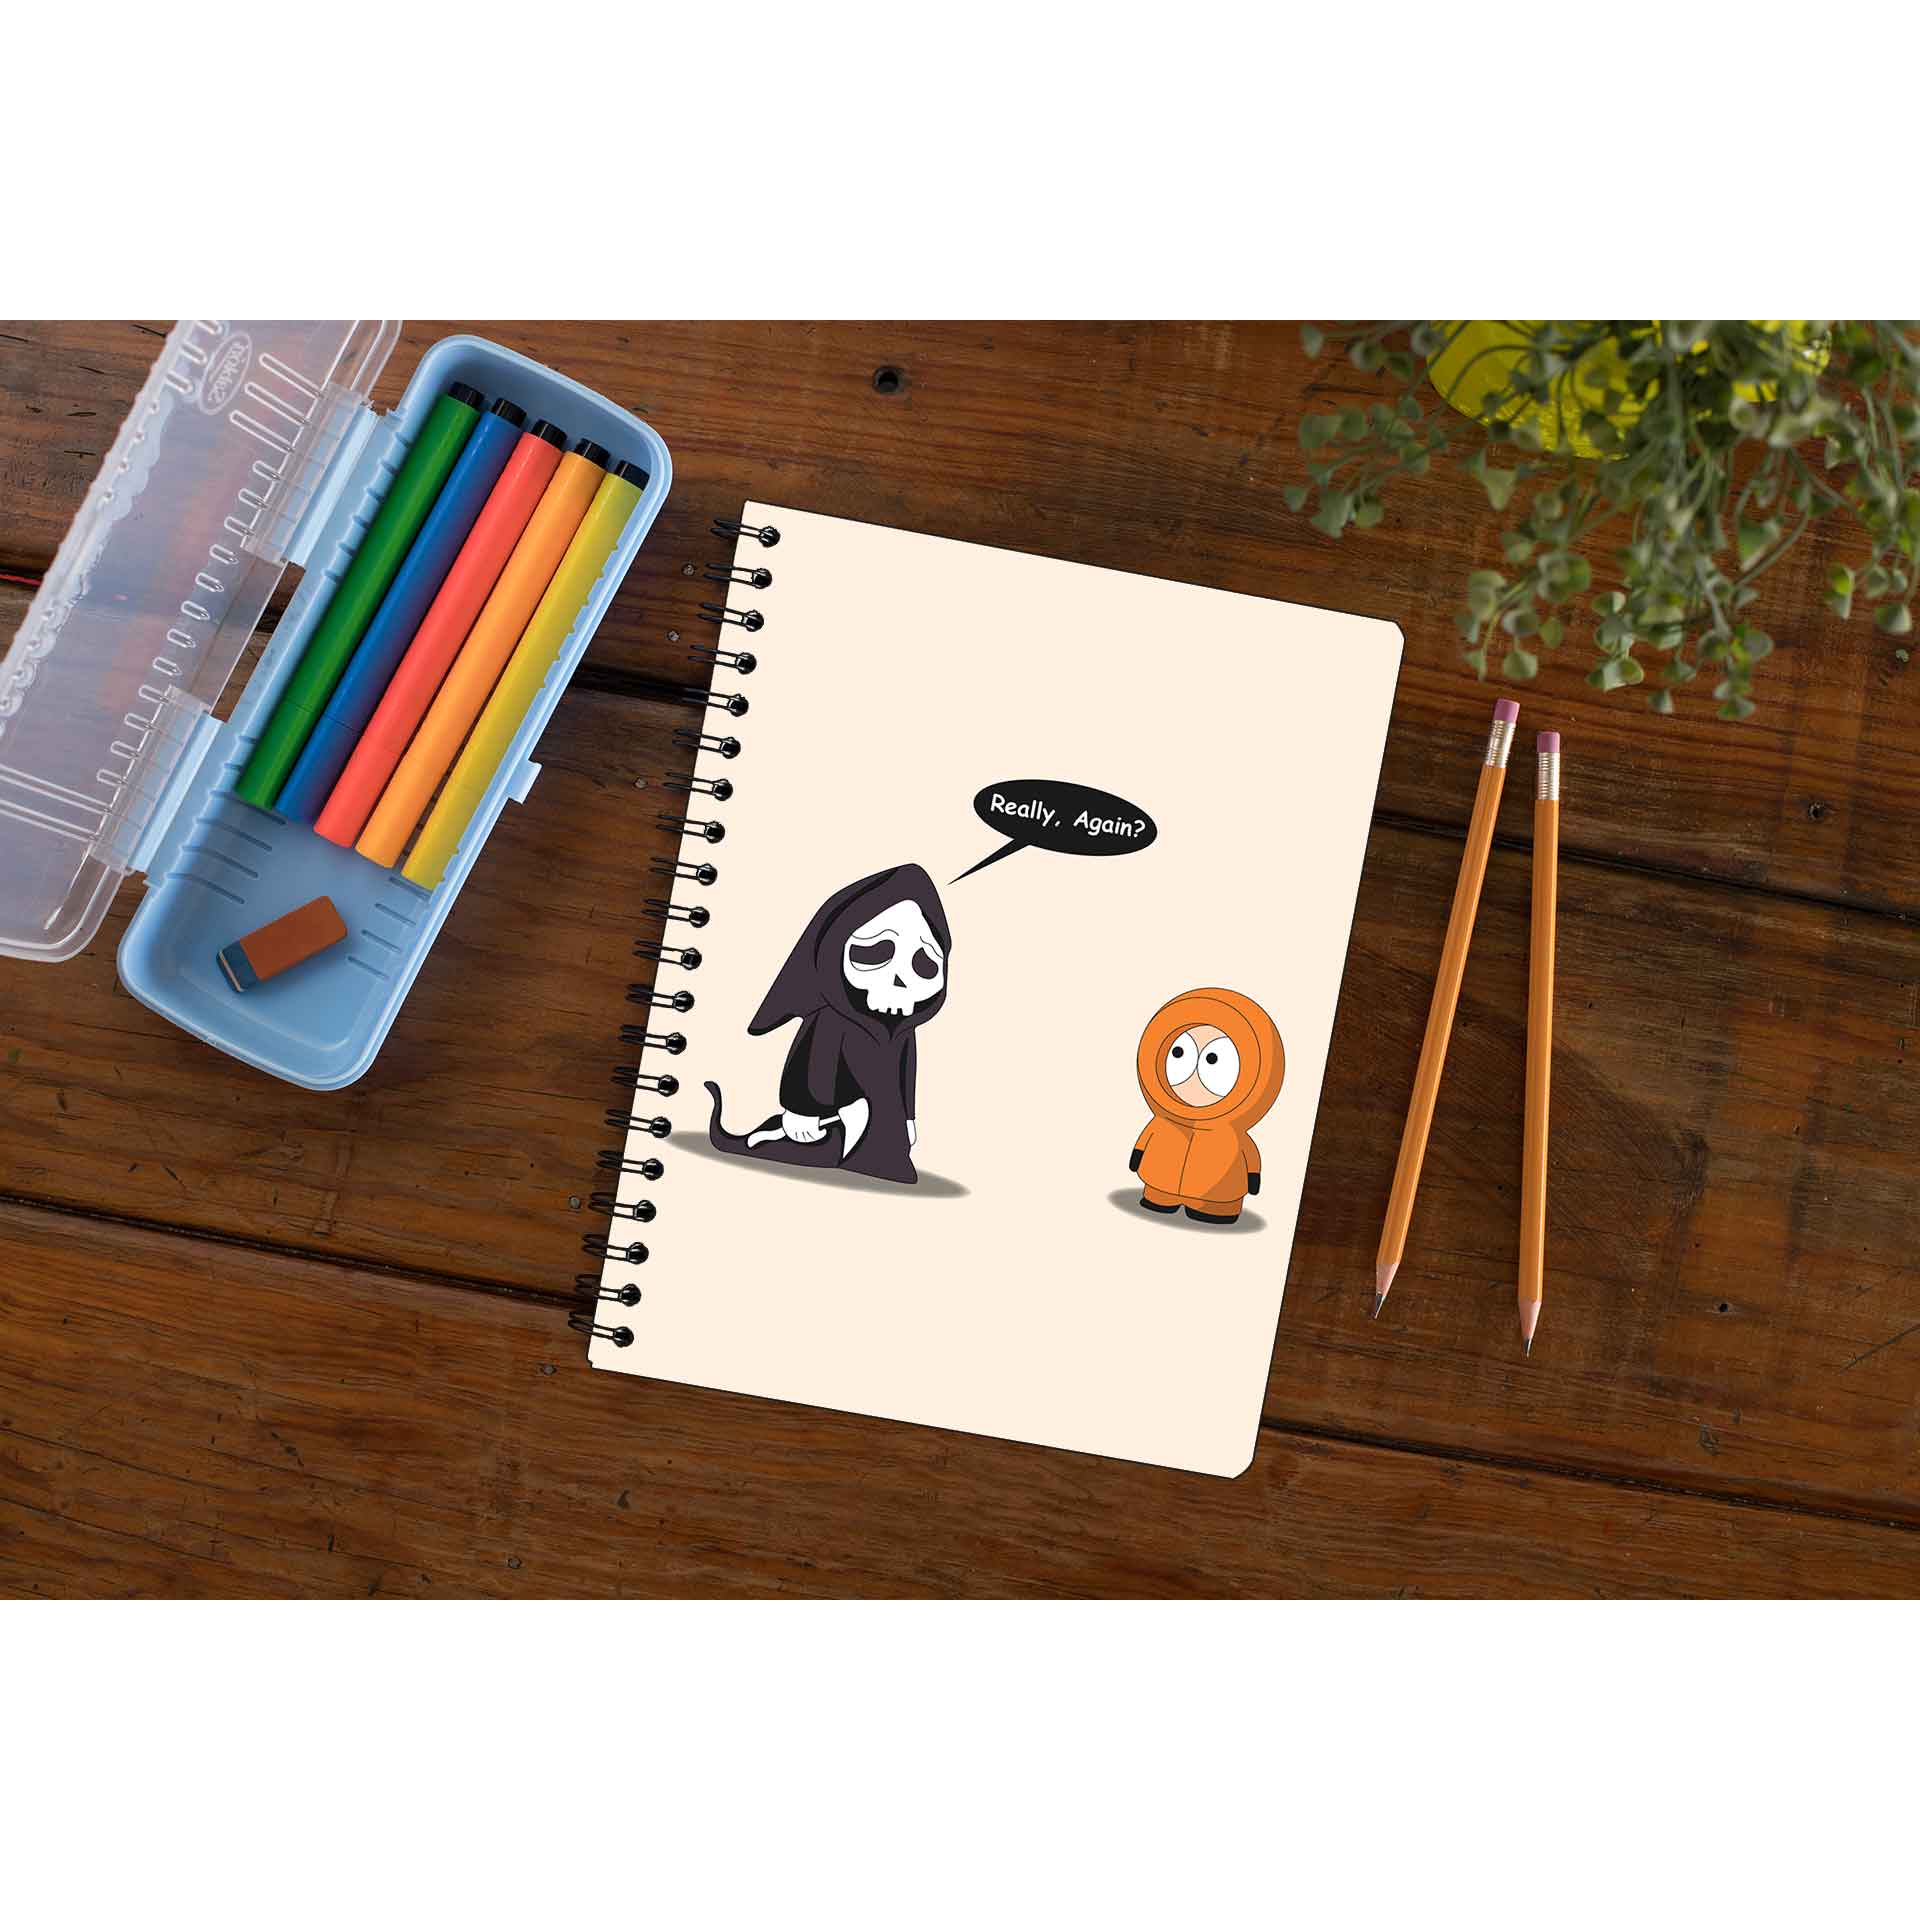 south park grim reaper notebook notepad diary buy online india the banyan tee tbt unruled south park kenny cartman stan kyle cartoon character illustration grim reaper